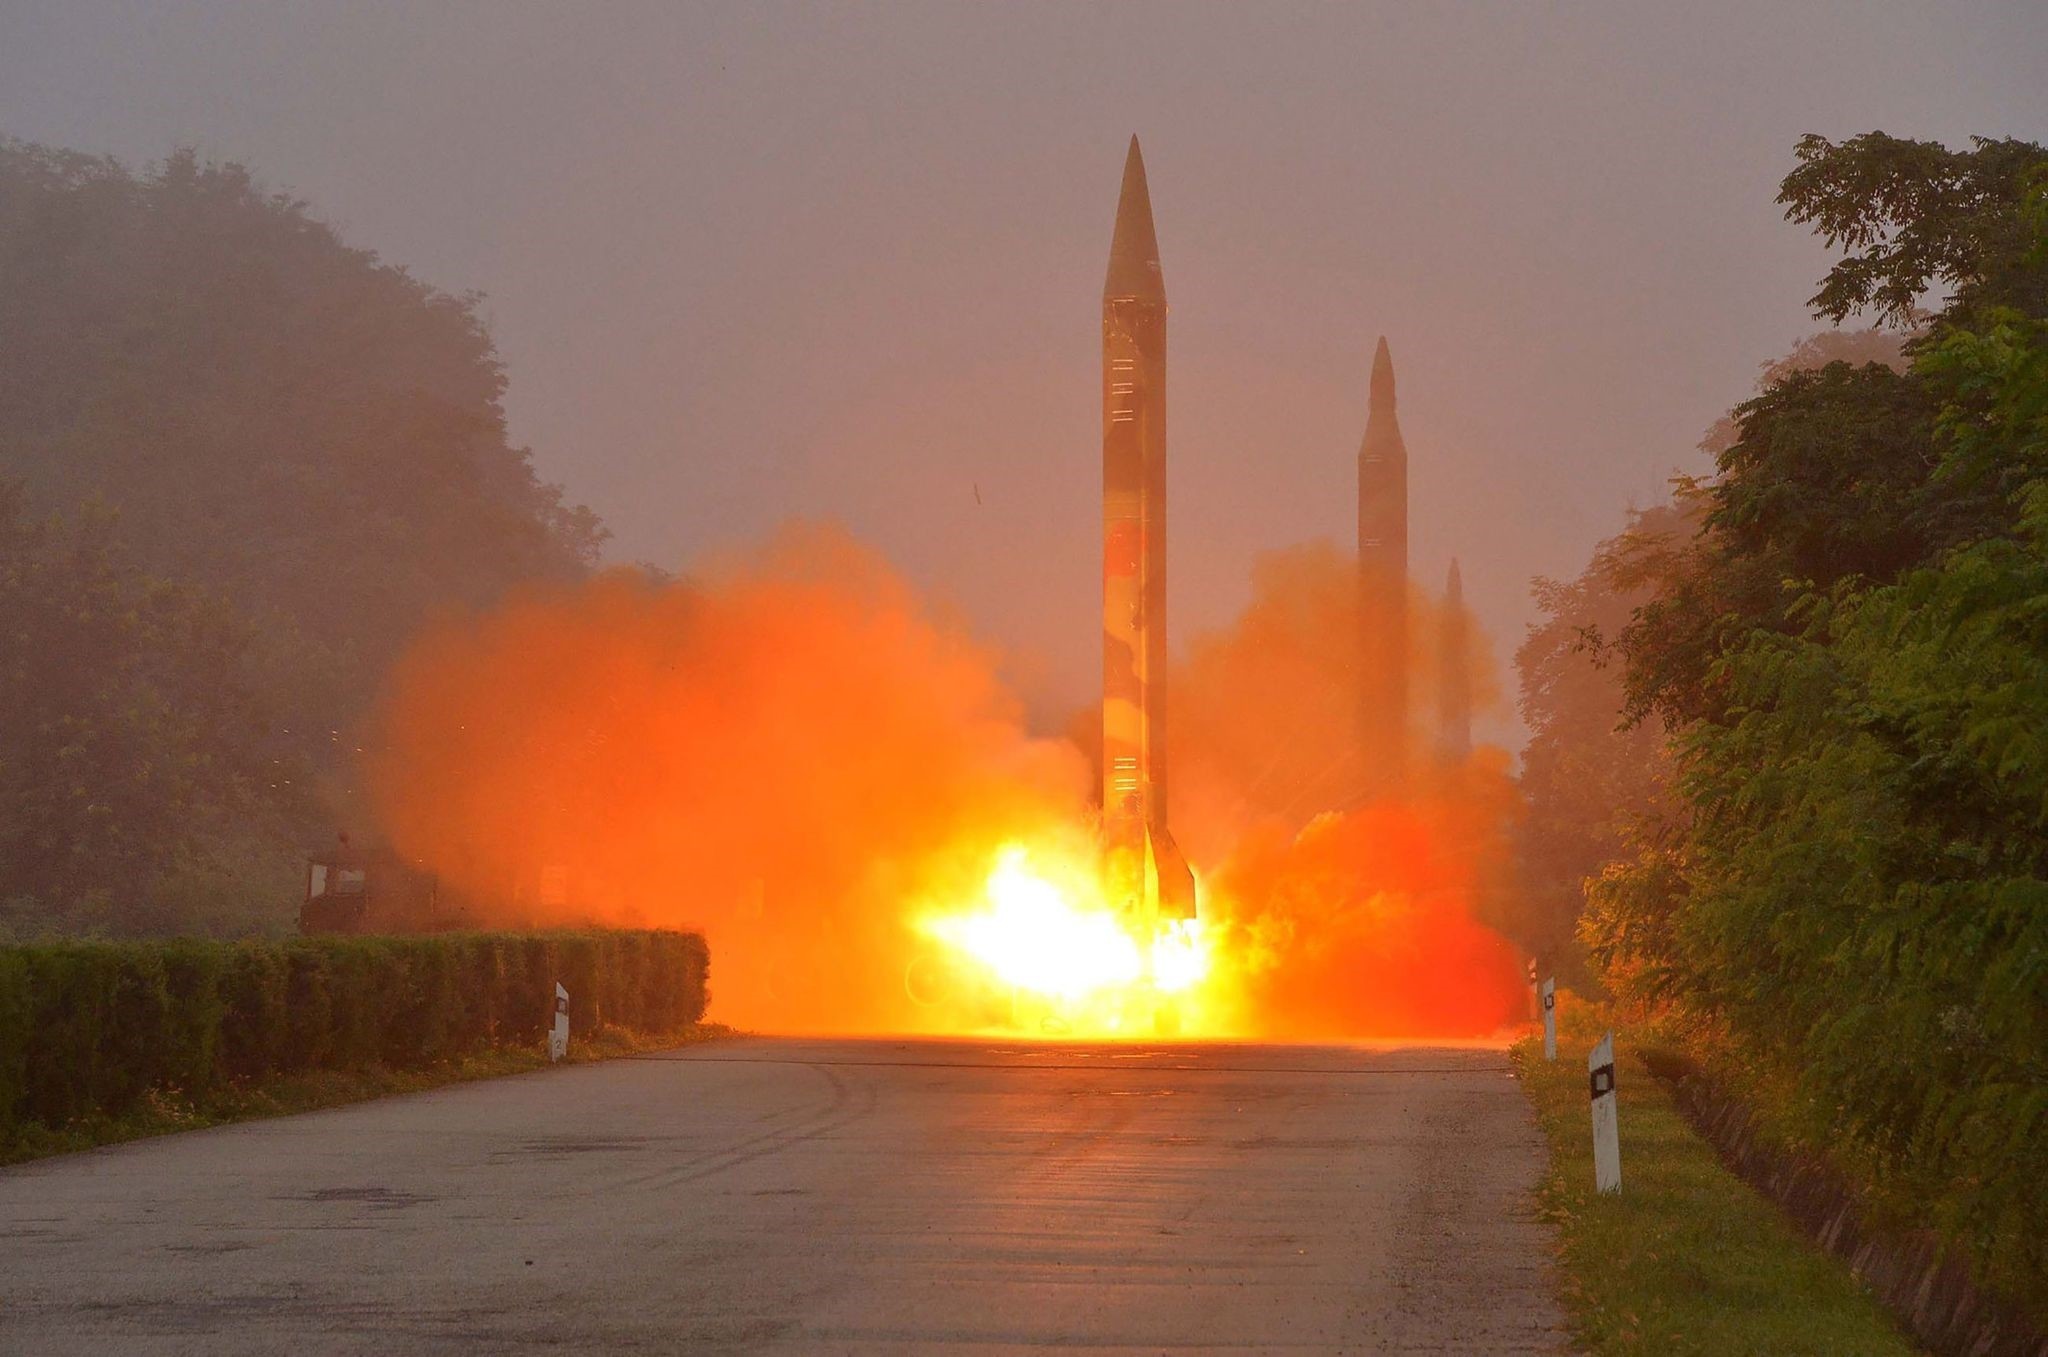 North Korea on August 3, 2016 test-fired a ballistic missile towards the Sea of Japan, South Korea said, in an apparent show of force against the planned deployment of a US missile defence system. (AFP Photo)